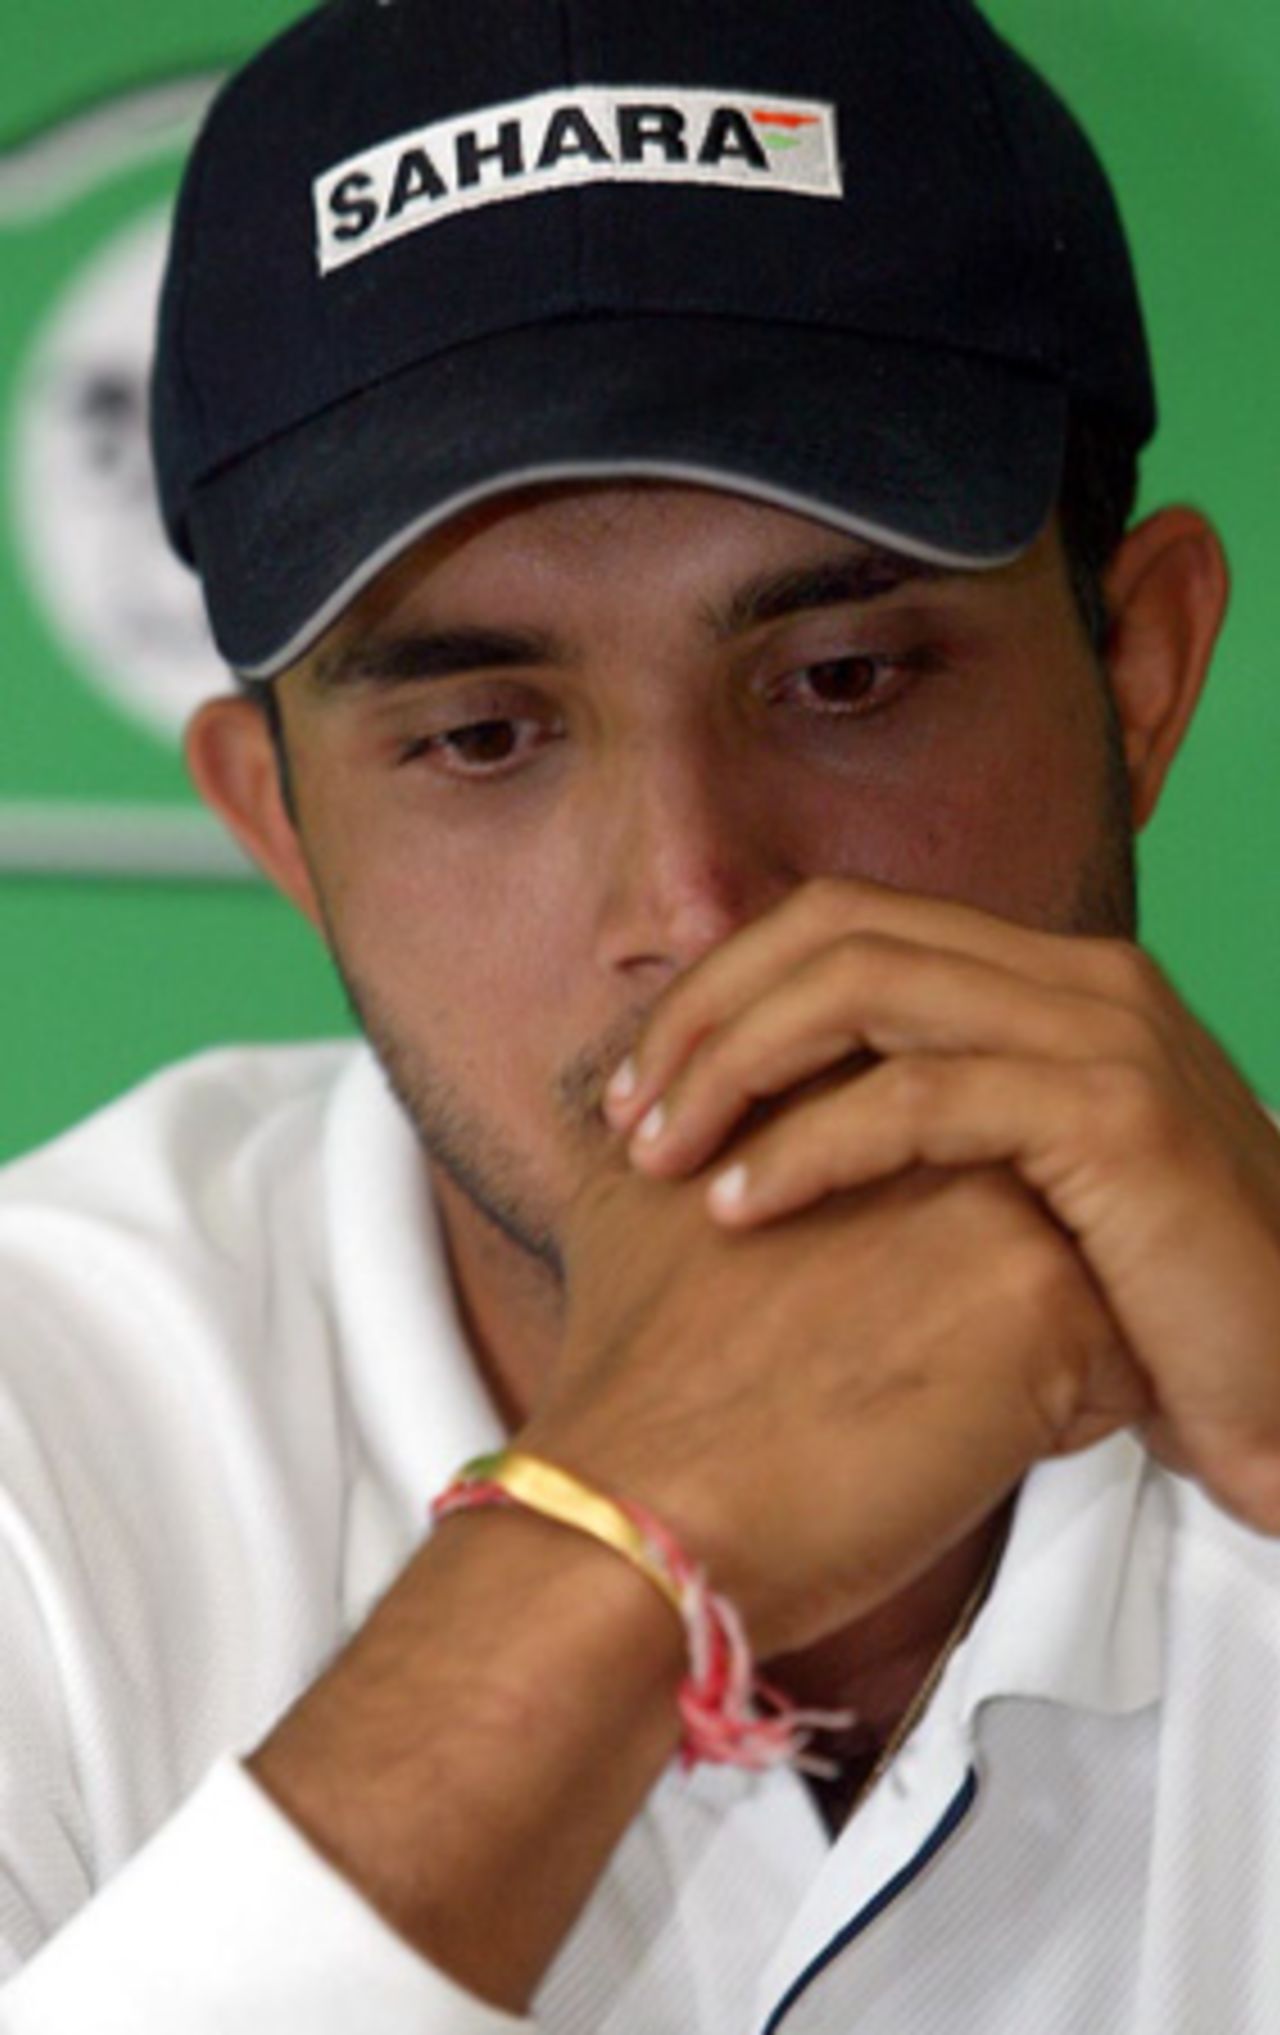 Indian captain Sourav Ganguly shows his disappointment at the post-match press conference after India lost the two-Test series against New Zealand 2-0. 2nd Test: New Zealand v India at Westpac Park, Hamilton, 19-23 December 2002 (22 December 2002).